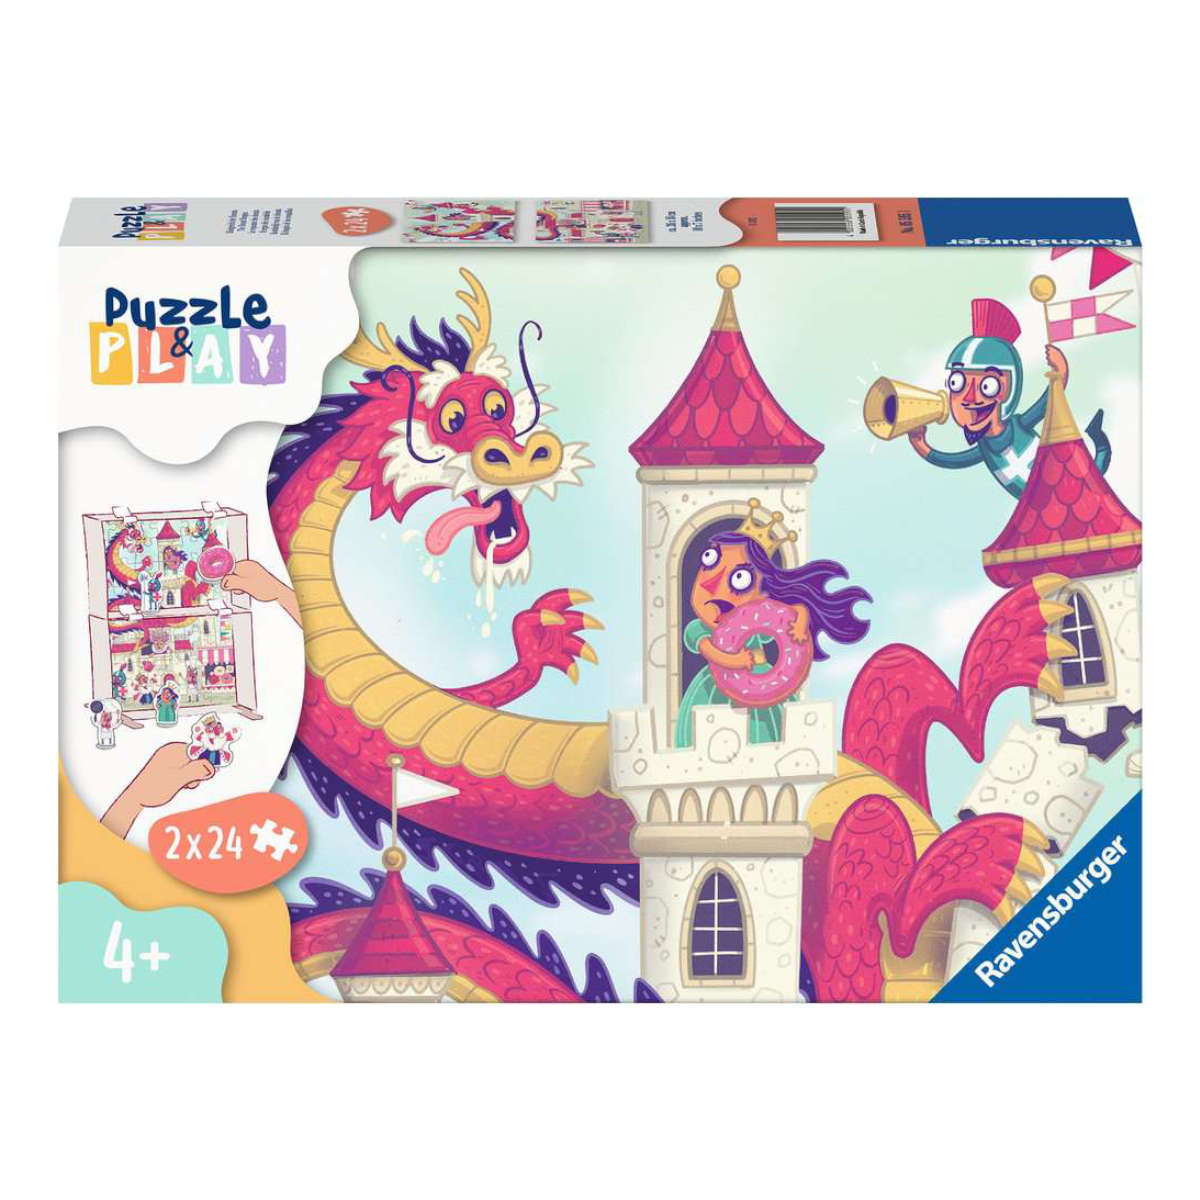 Ravensburger Puzzle & Play: The Donut Dragon